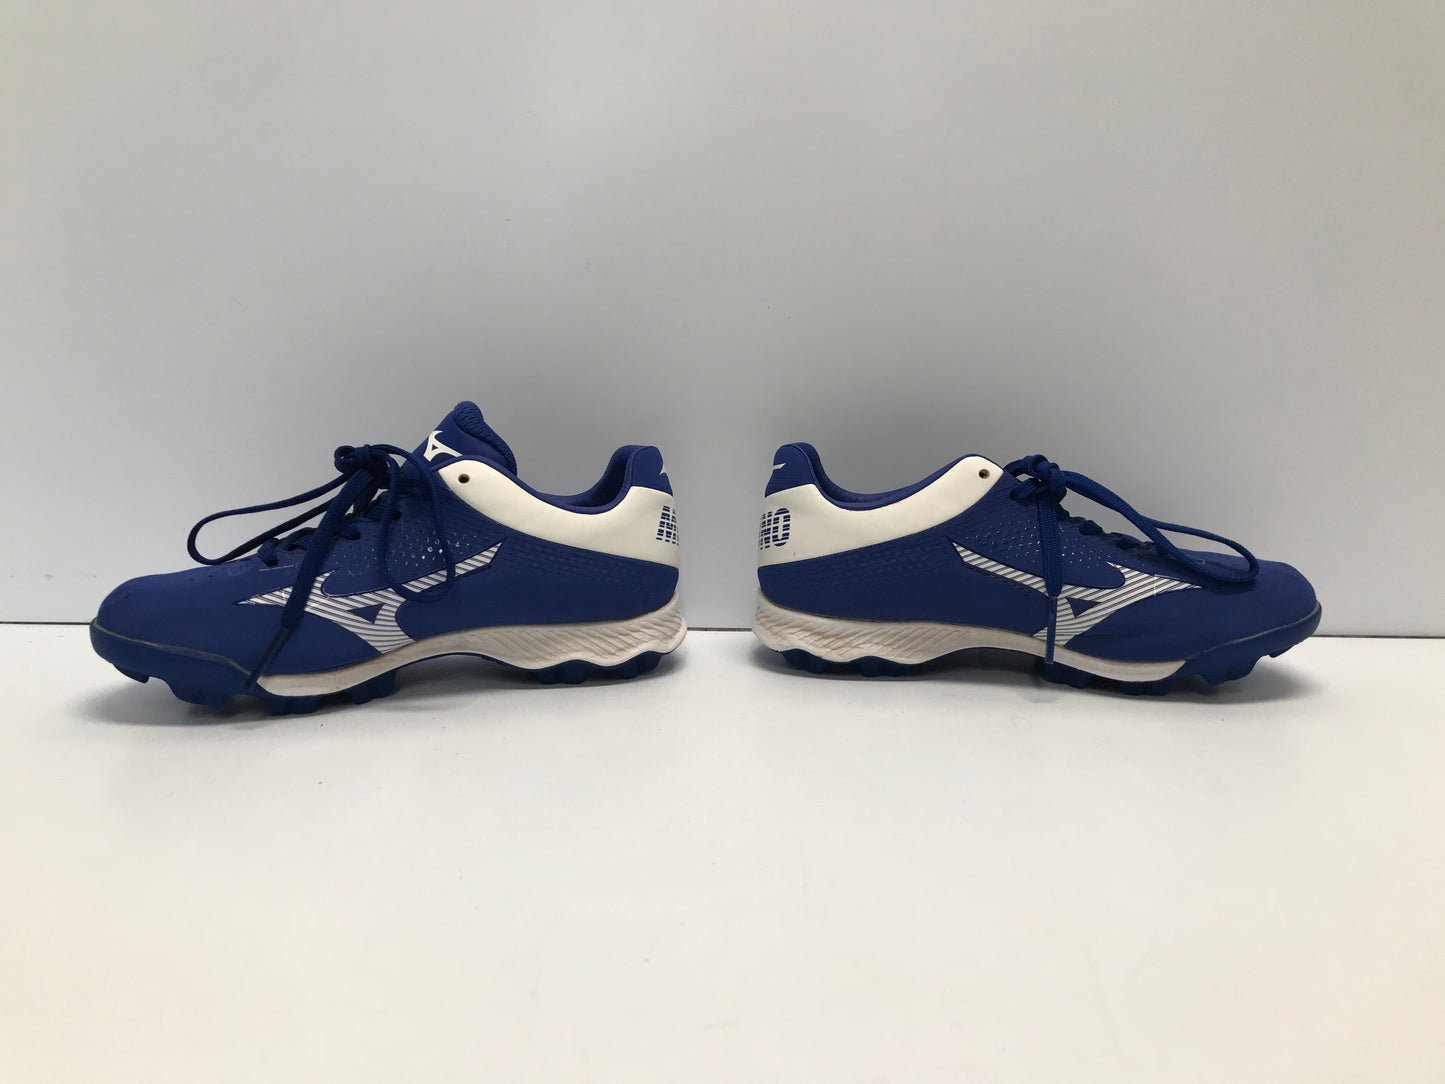 Baseball Shoes Cleats Child Size 1.5 Mizuno Blue White Excellent